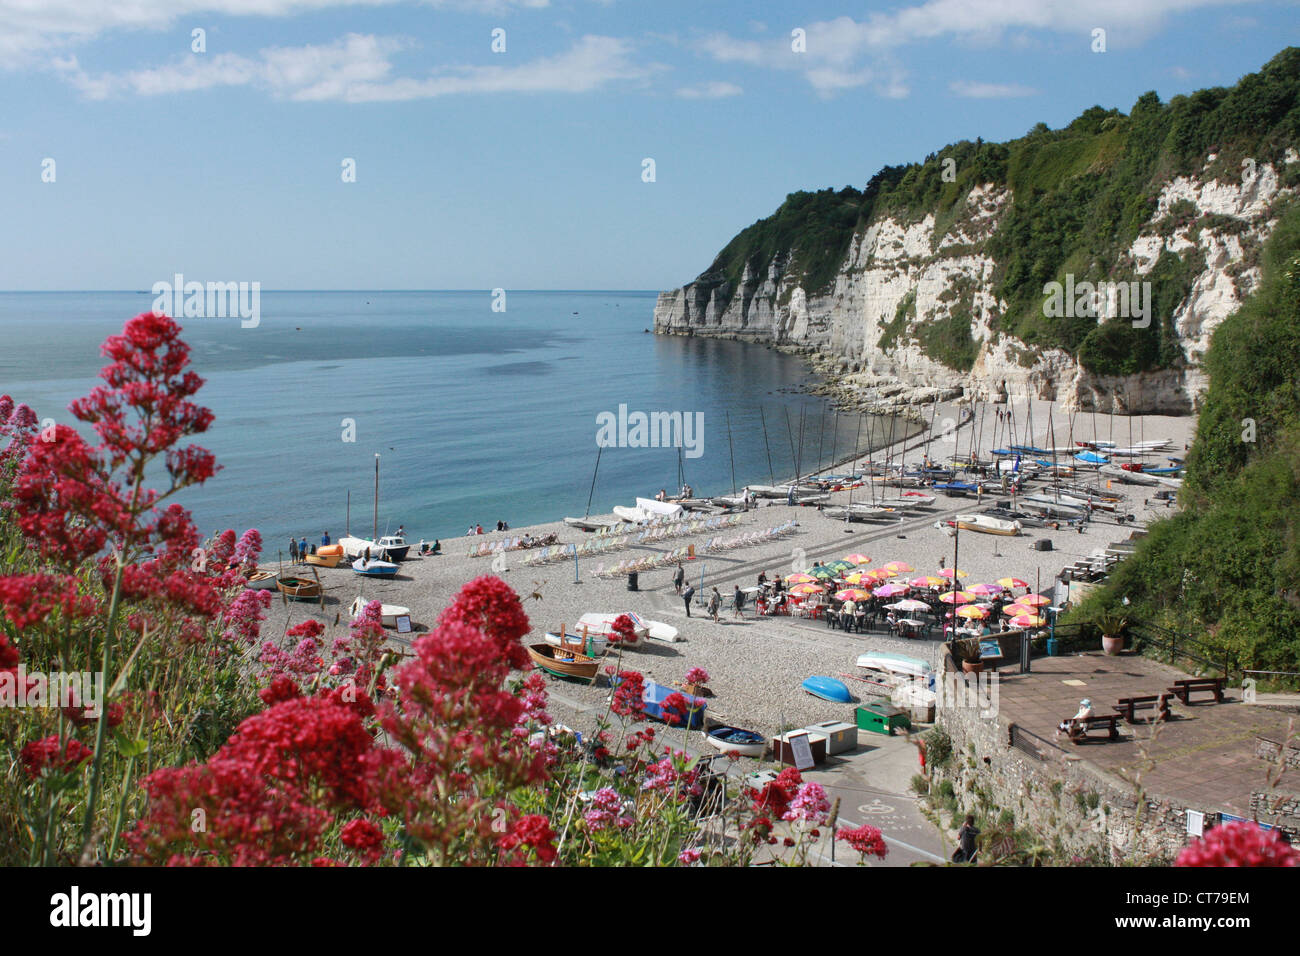 The beach with fishing boats from the Jubilee Memorial Gardens at Beer fishing village, East Devon, UK Stock Photo